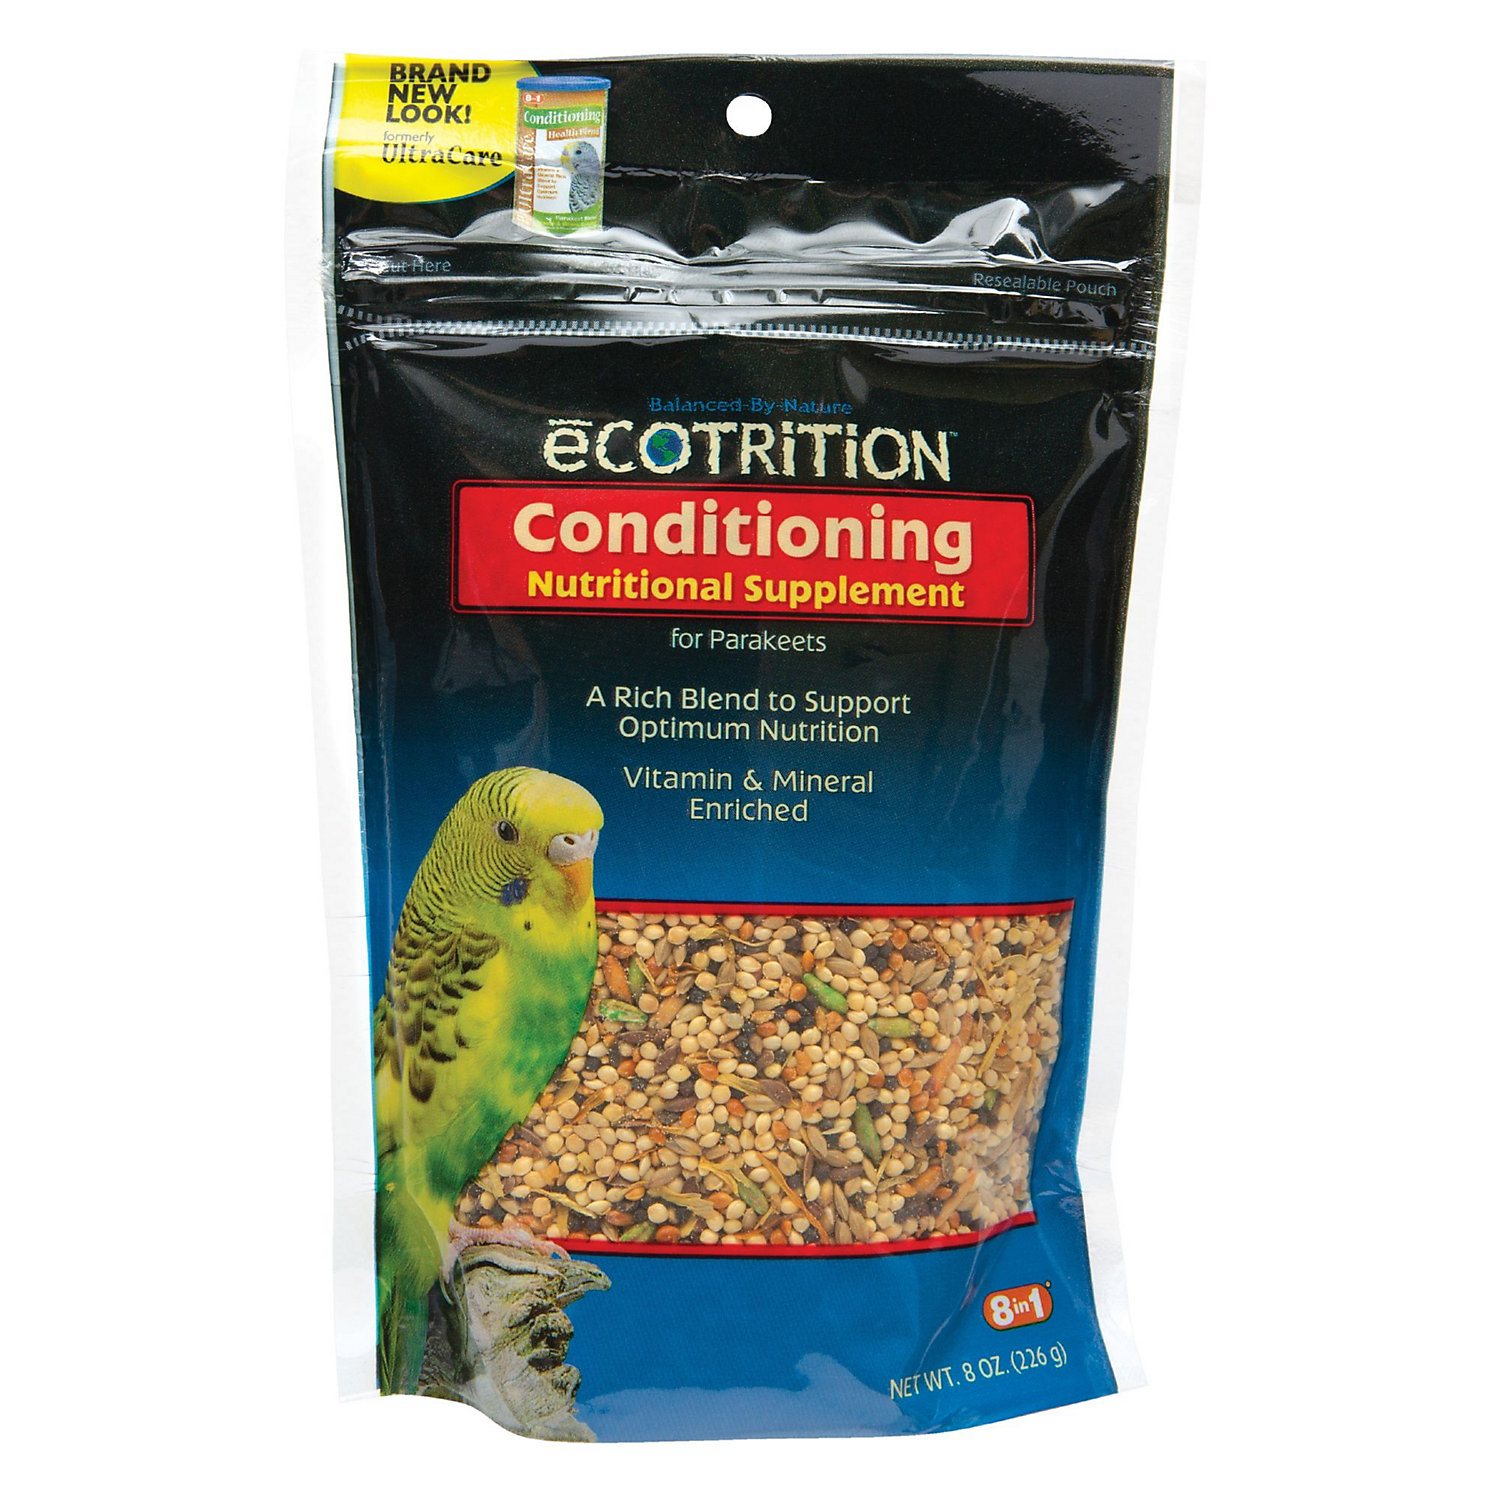 eCOTRITION Conditioning Health Blend for Parakeets